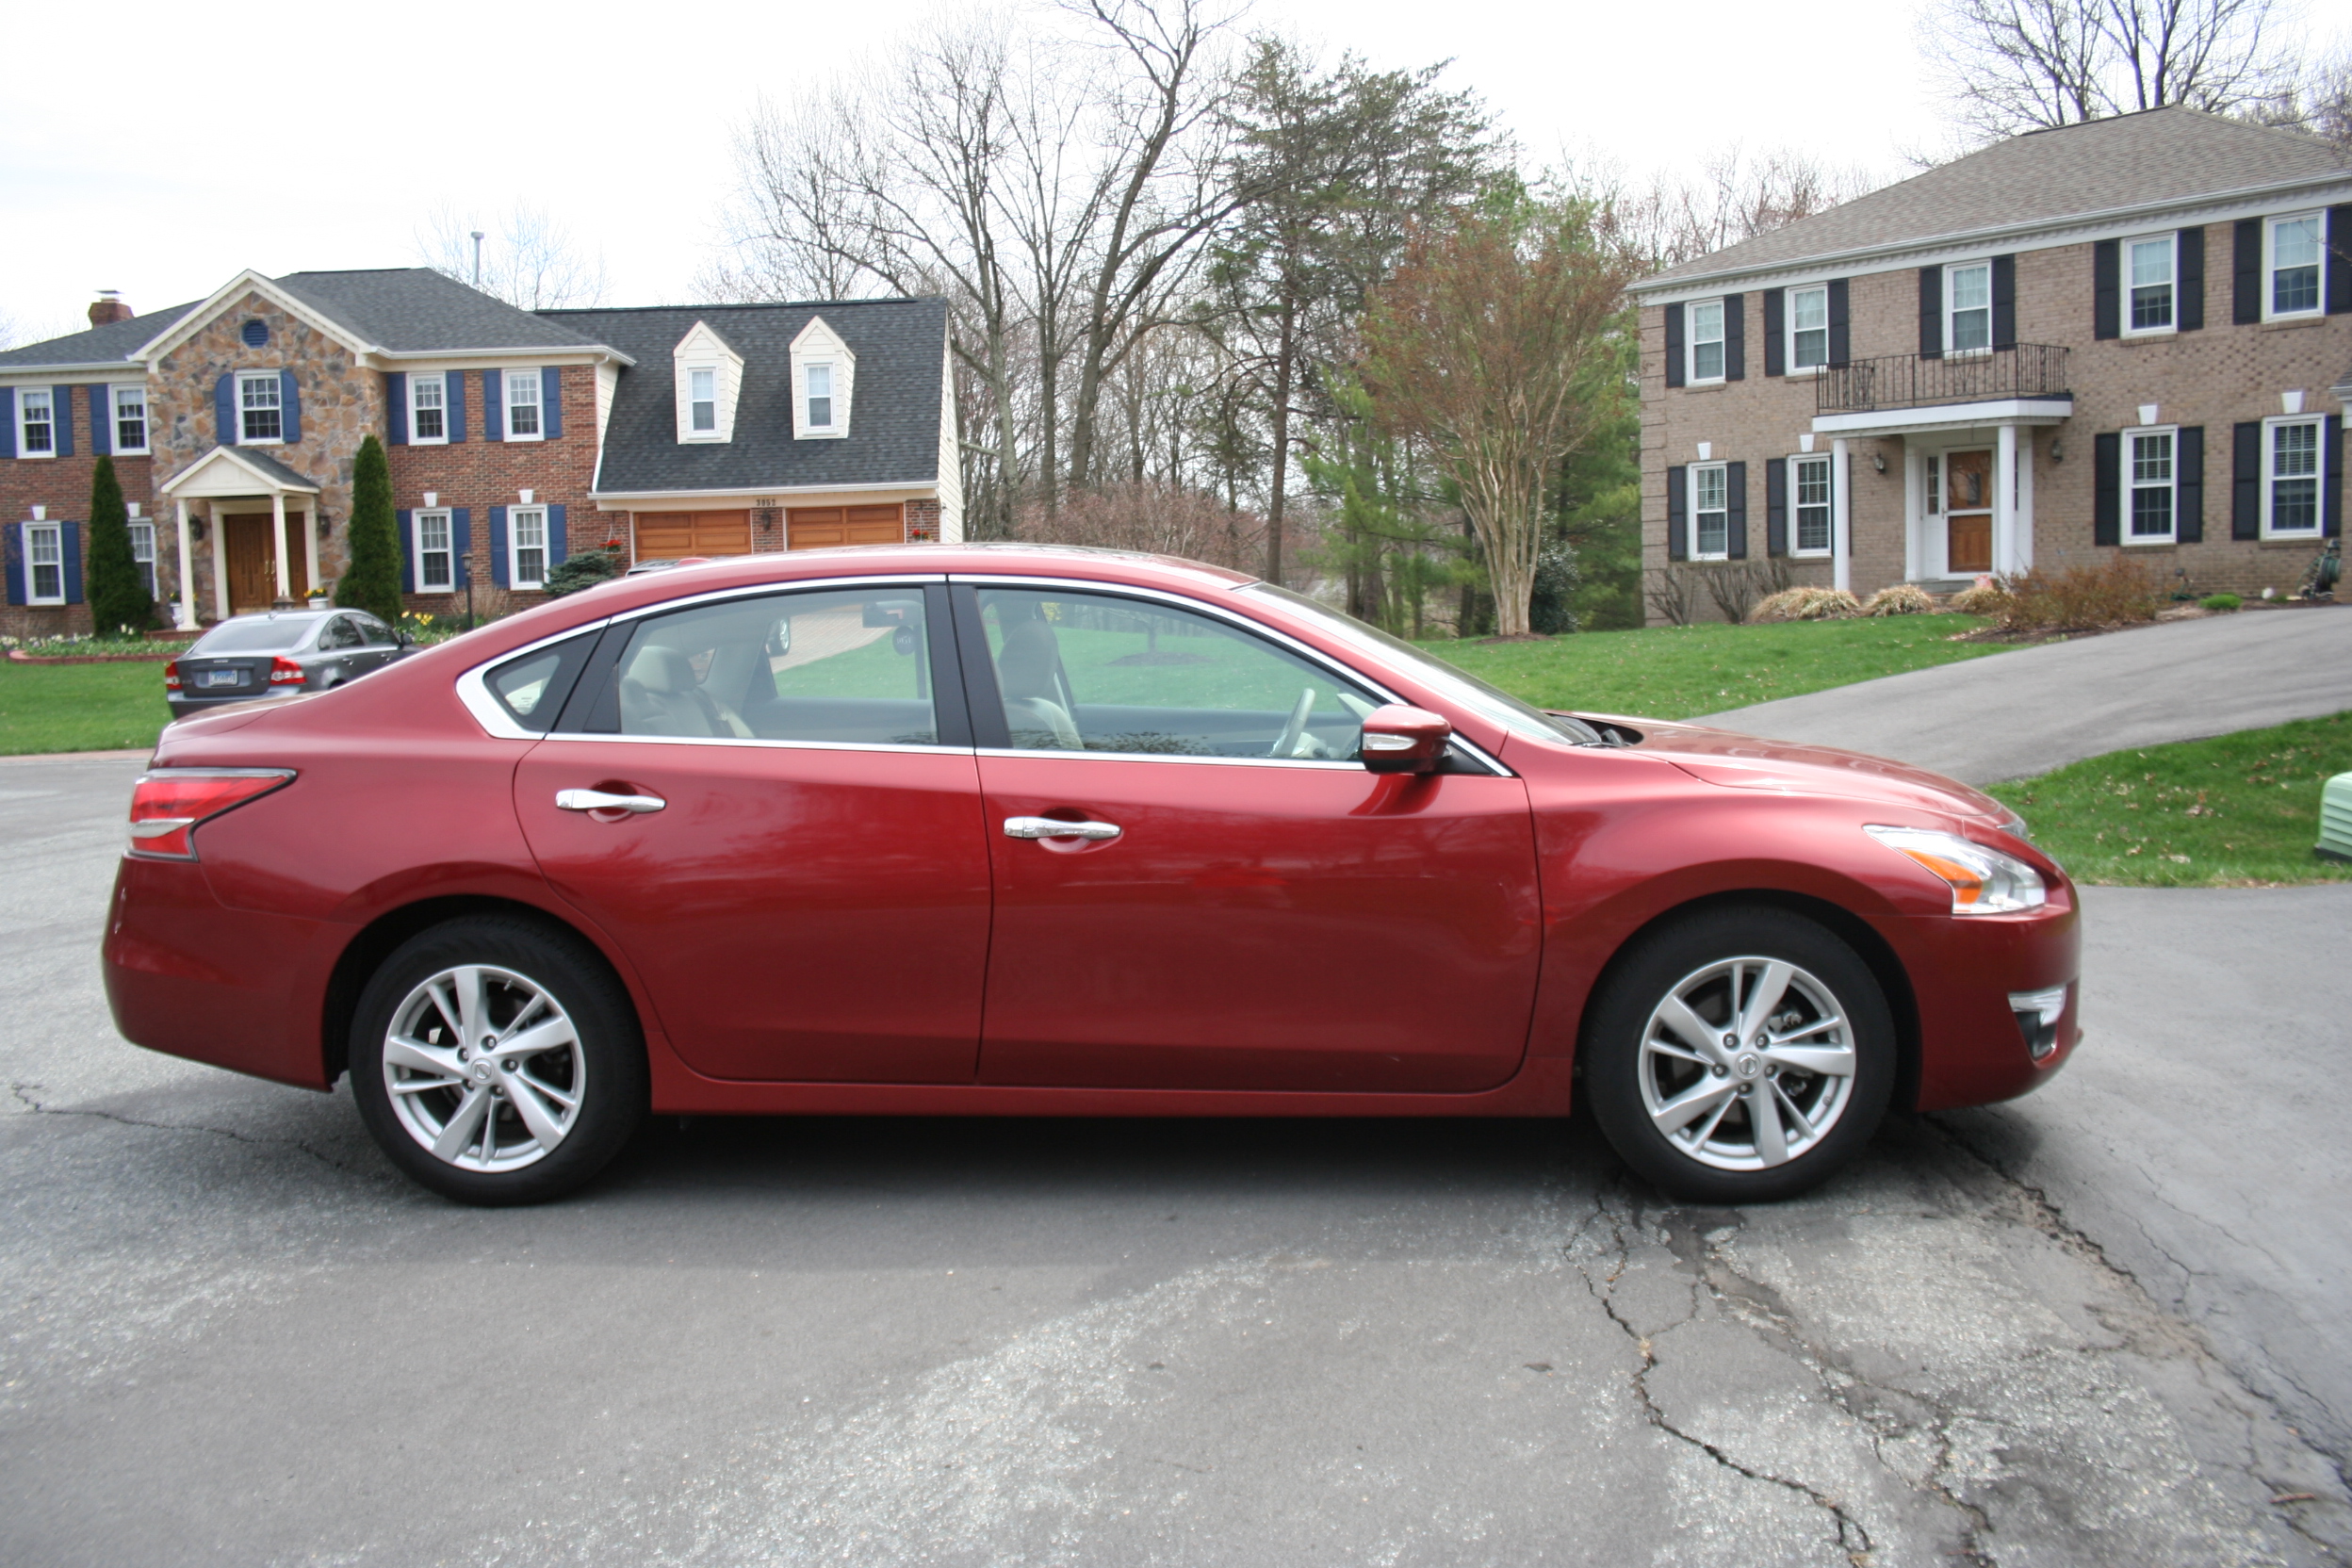 Car Report: 2014 Nissan Altima doesn’t mess with success